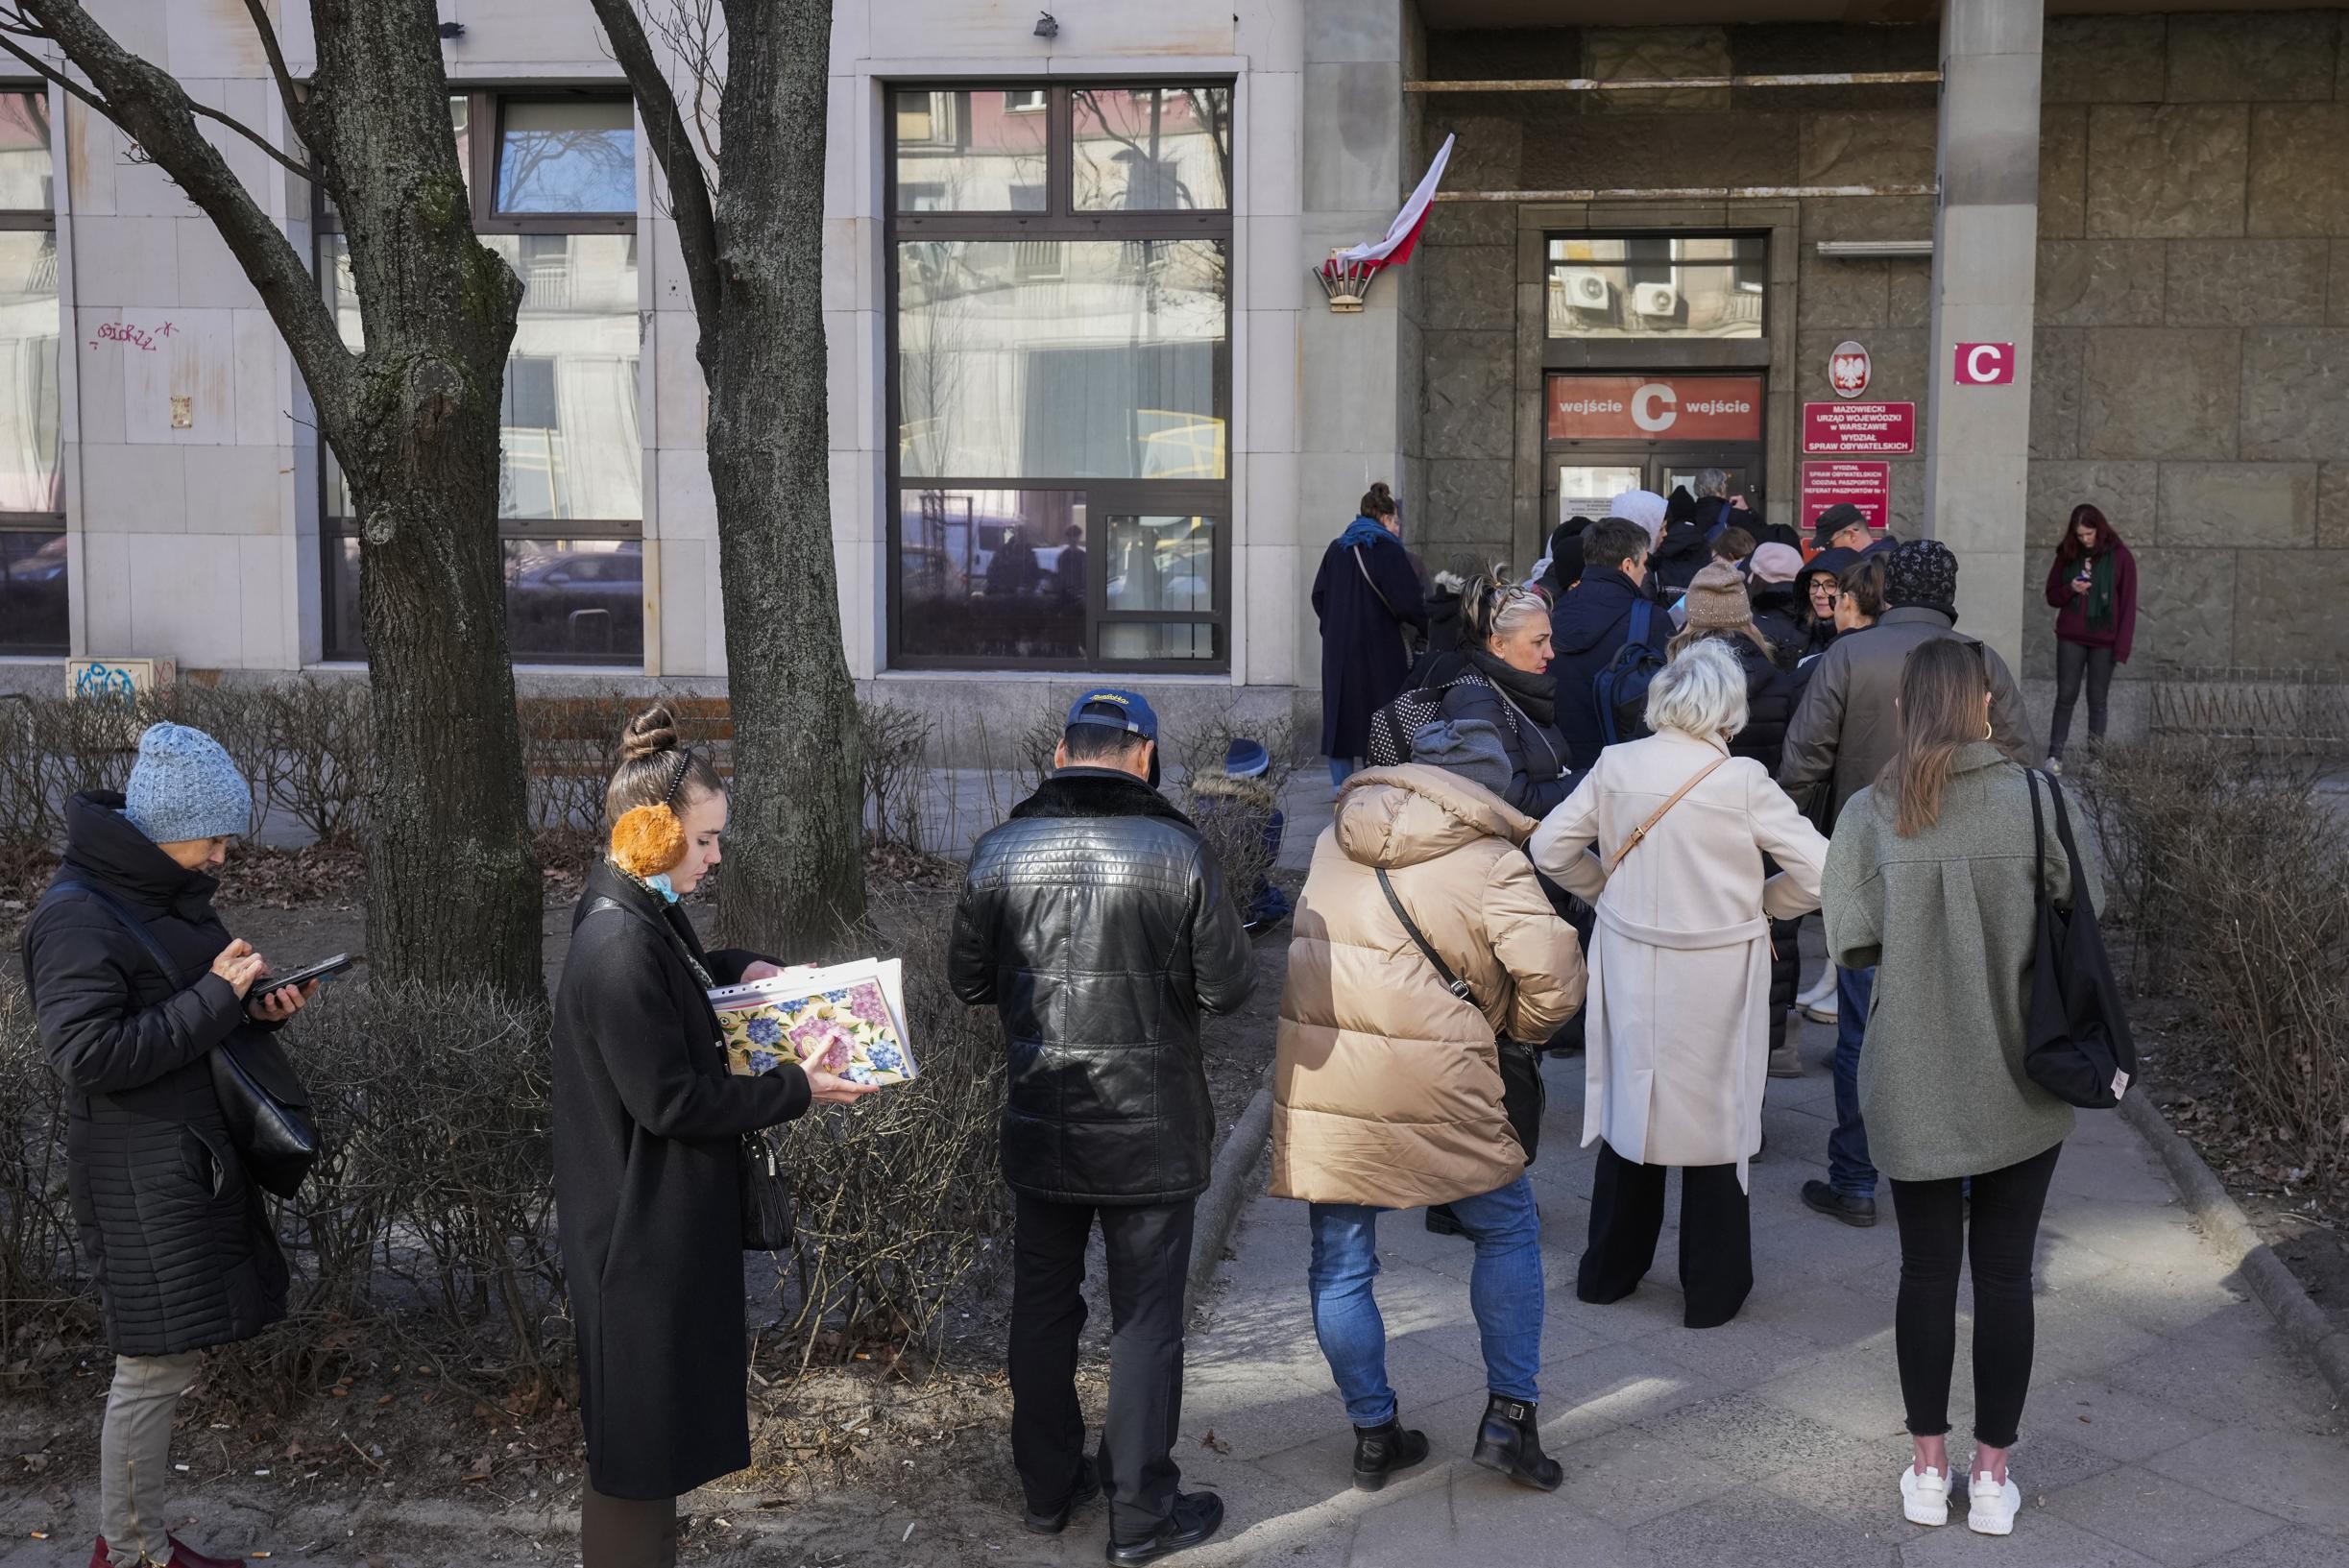 Warsaw moans under influx of Ukrainians: population increased by 15 percent in 2 weeks